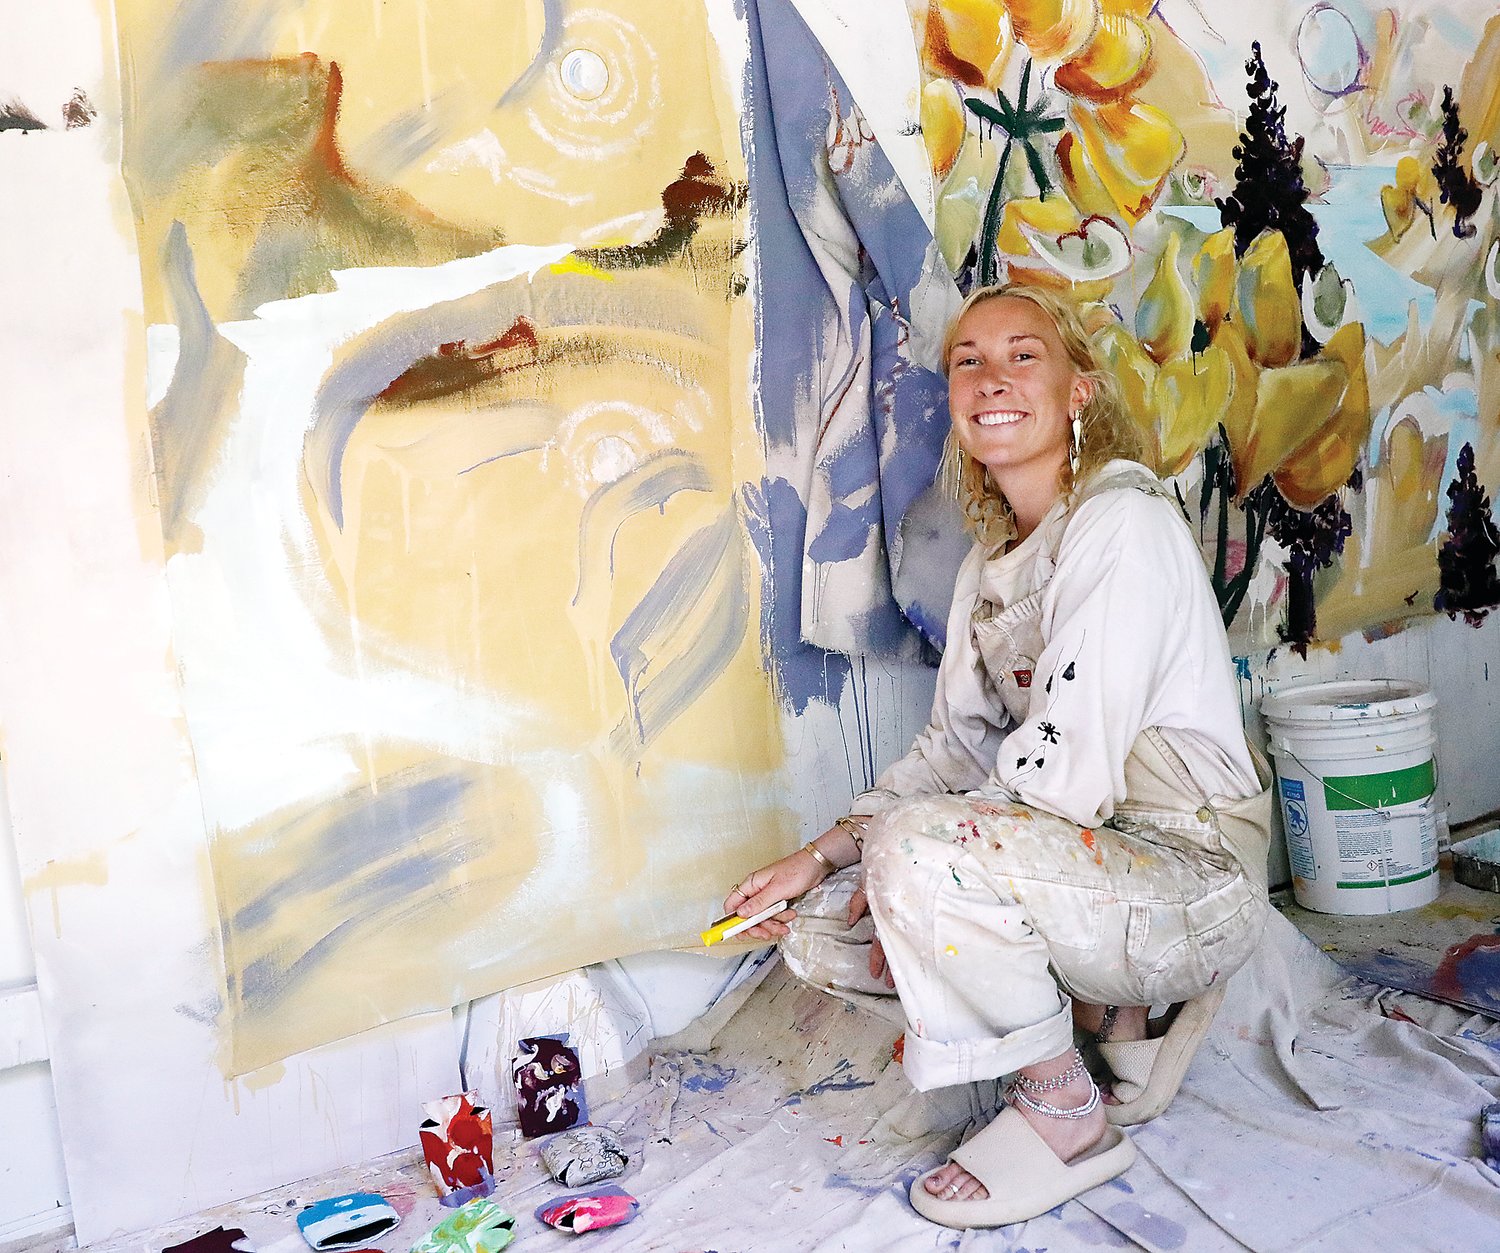 Ely artist Leah Reusch is drawn to the natural world for her artistic inspiration.